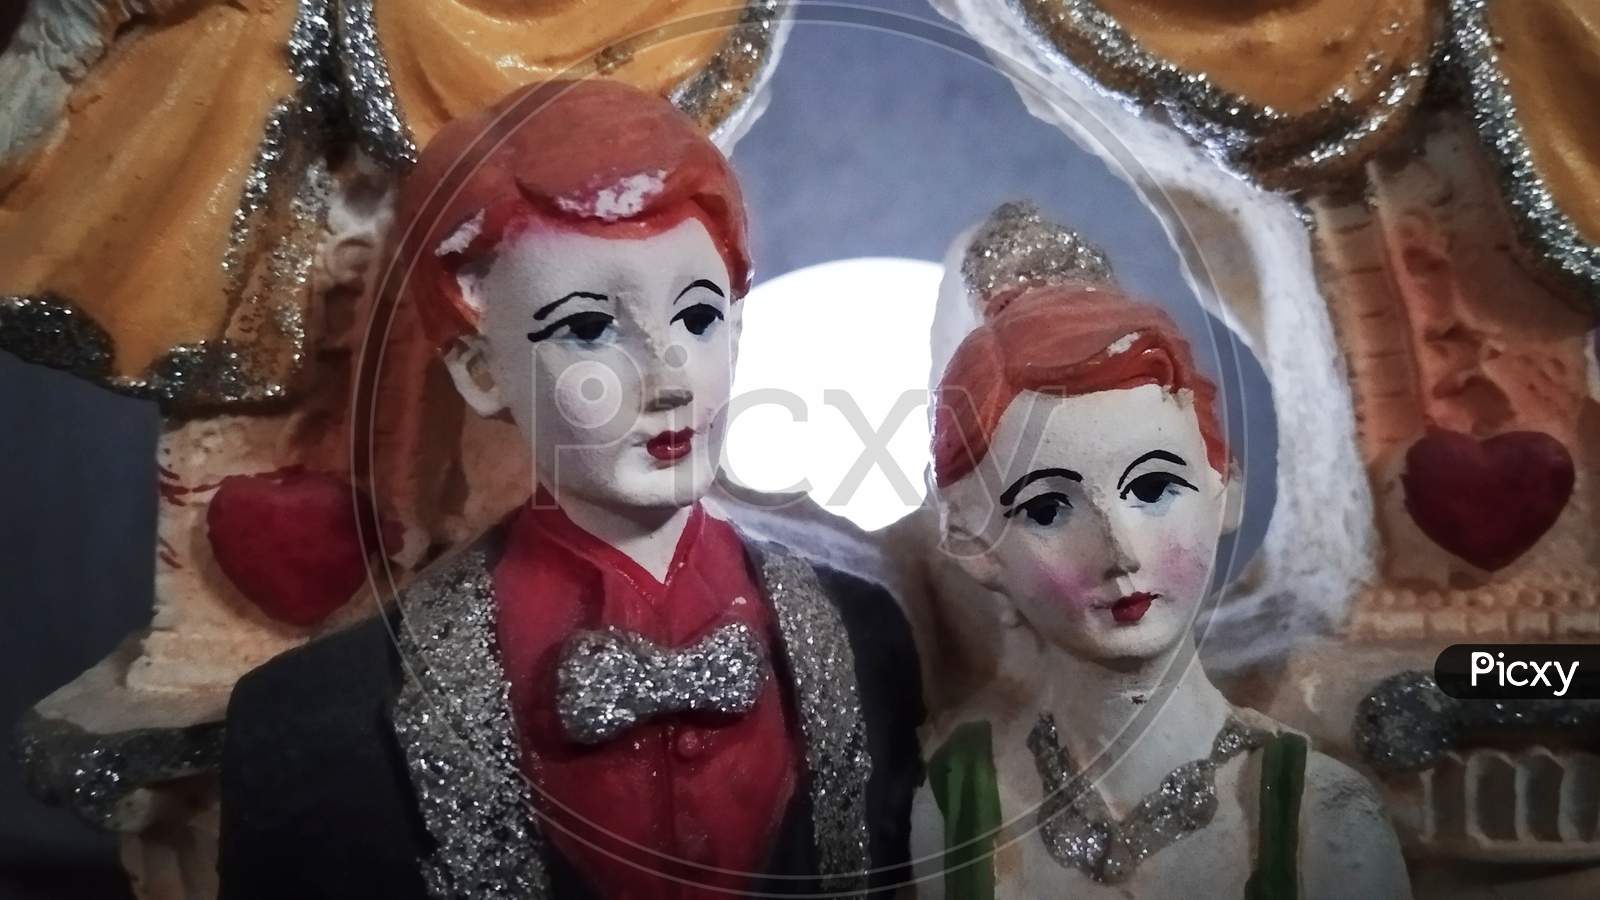 This is an image of bride and groom made by Clay art.